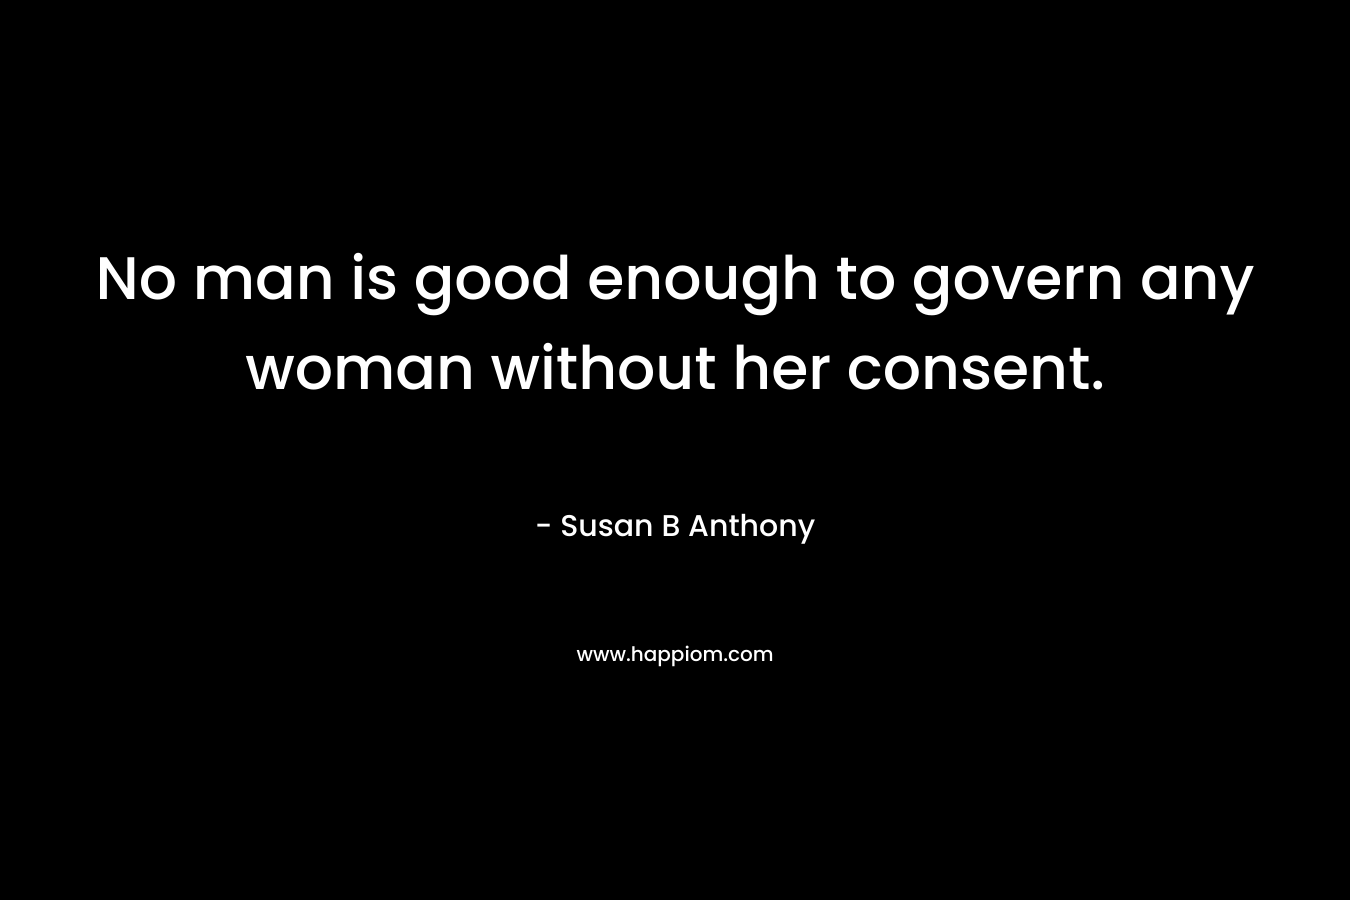 No man is good enough to govern any woman without her consent. – Susan B Anthony